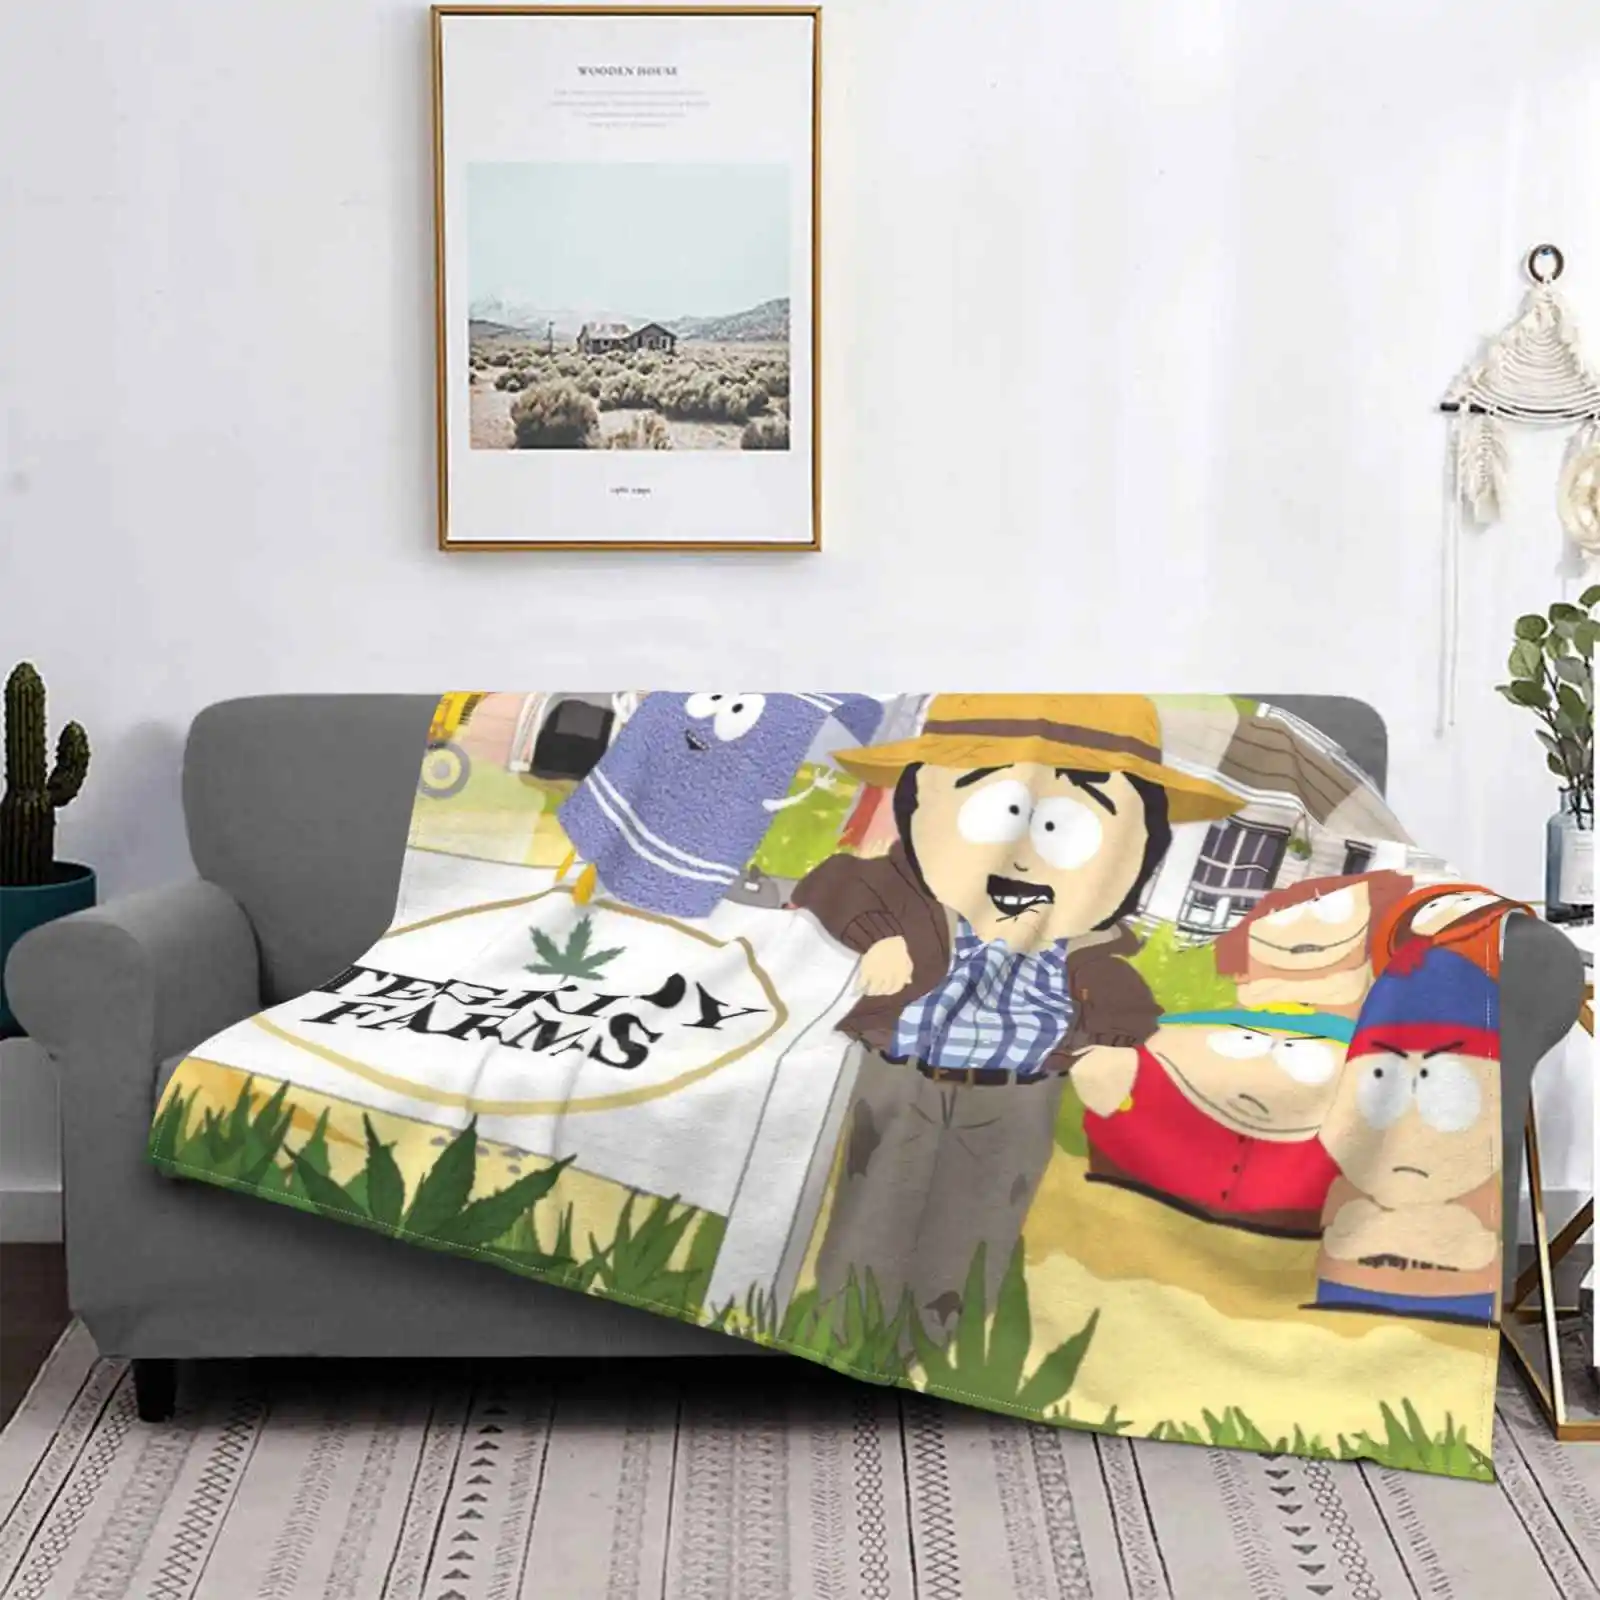 

Tegridy Farms Randy Marsh For Home Sofa Bed Camping Car Plane Travel Portable Blanket Tegridy Tegridy Farms Member Member